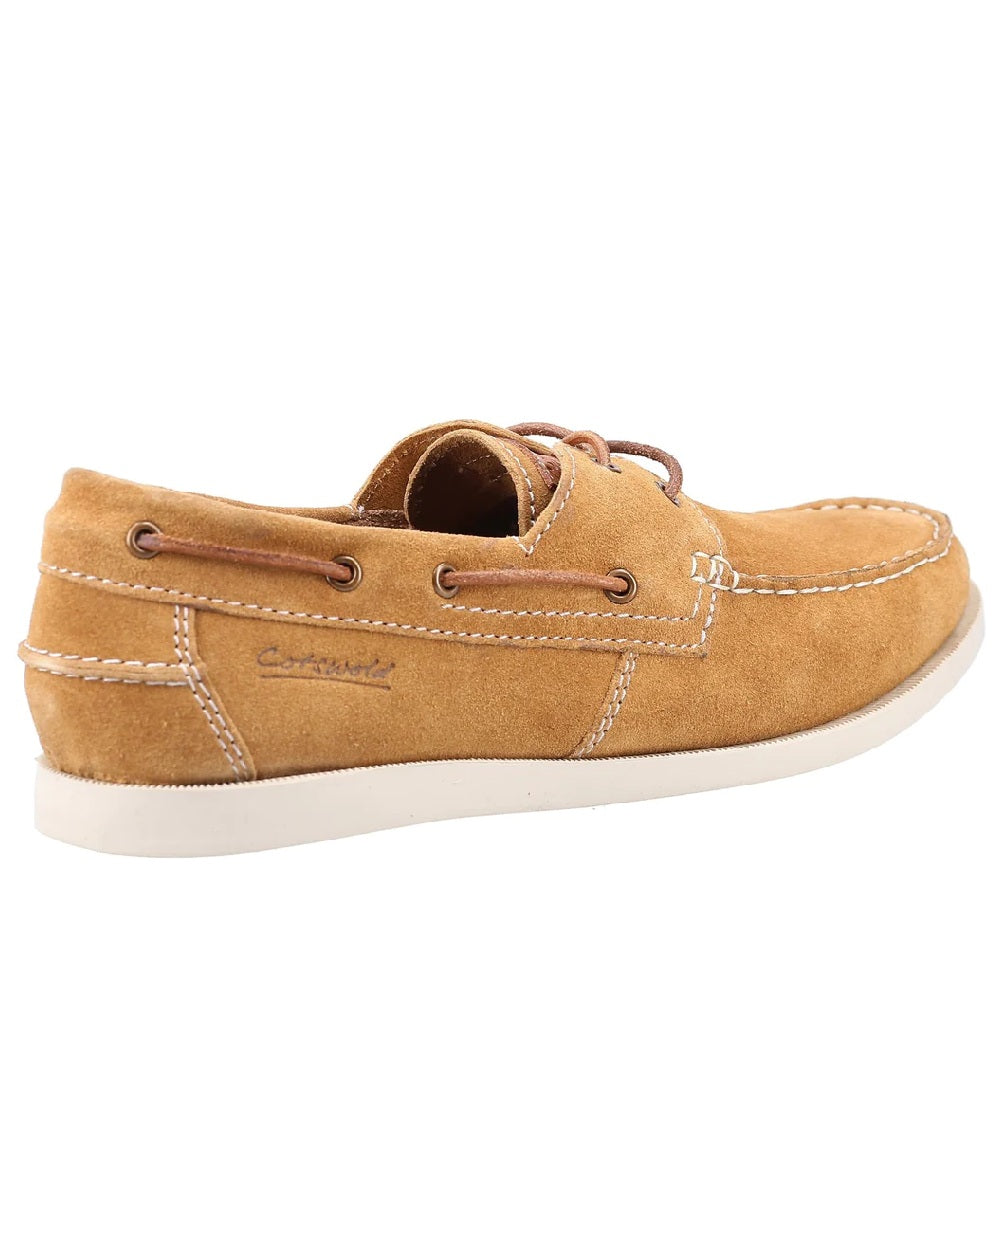 Cotswold Mitcheldean Boat Shoes in Camel